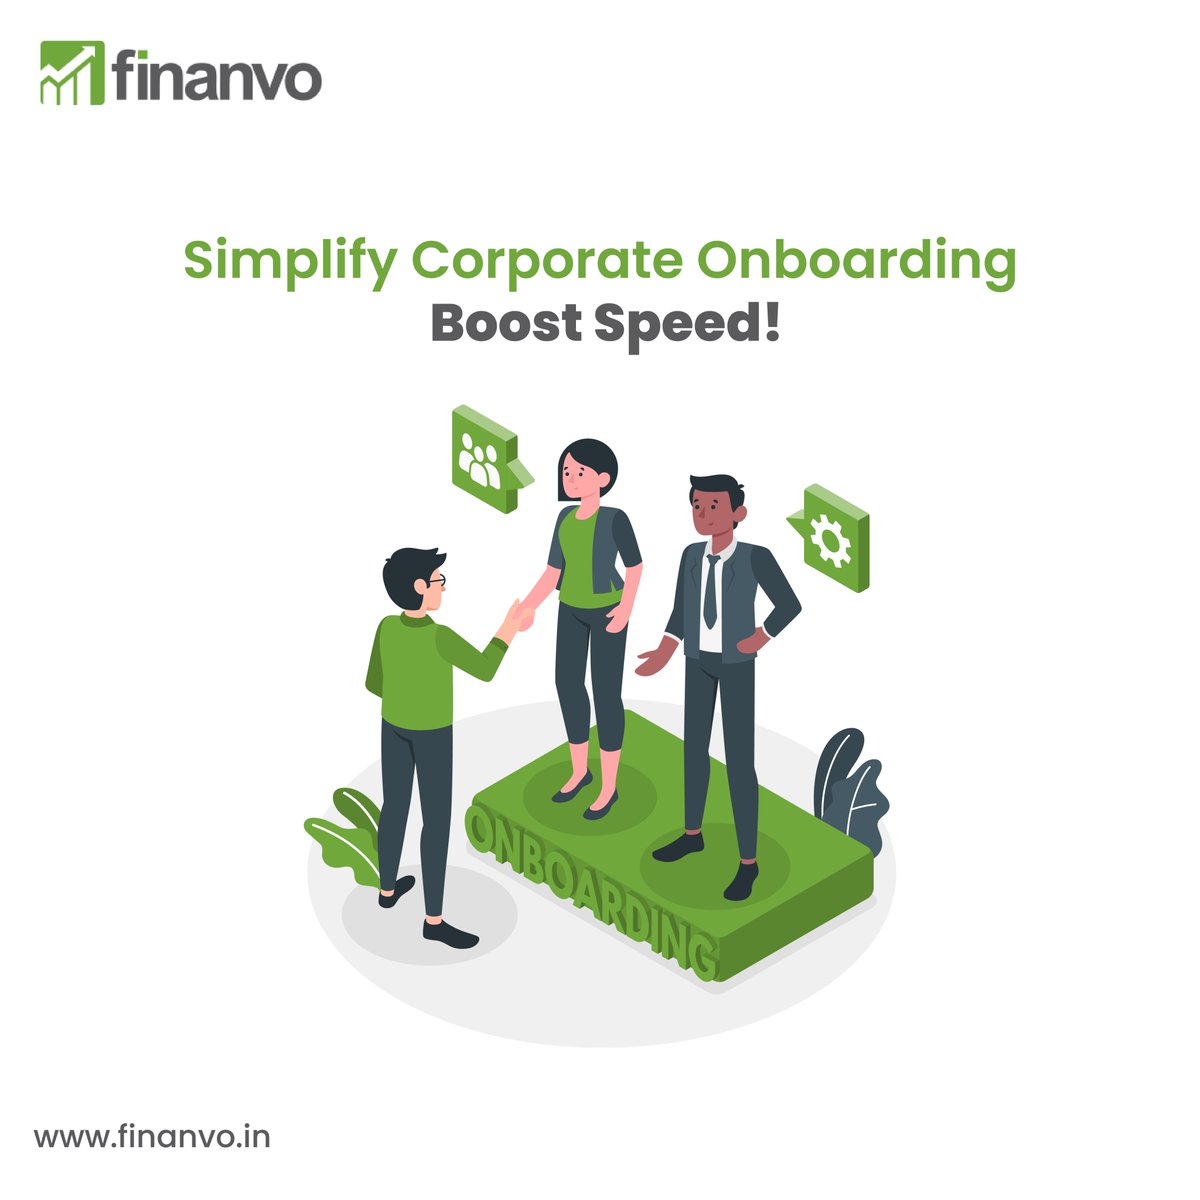 Are you tired of the #timeconsuming onboarding #process?

We understand the hassle of gathering and #verifying numerous documents like #INC certificates, #MoA, and more. Simplify onboarding with easy document access.

#Finanvo #OnboardingSimplified #EfficientOnboarding